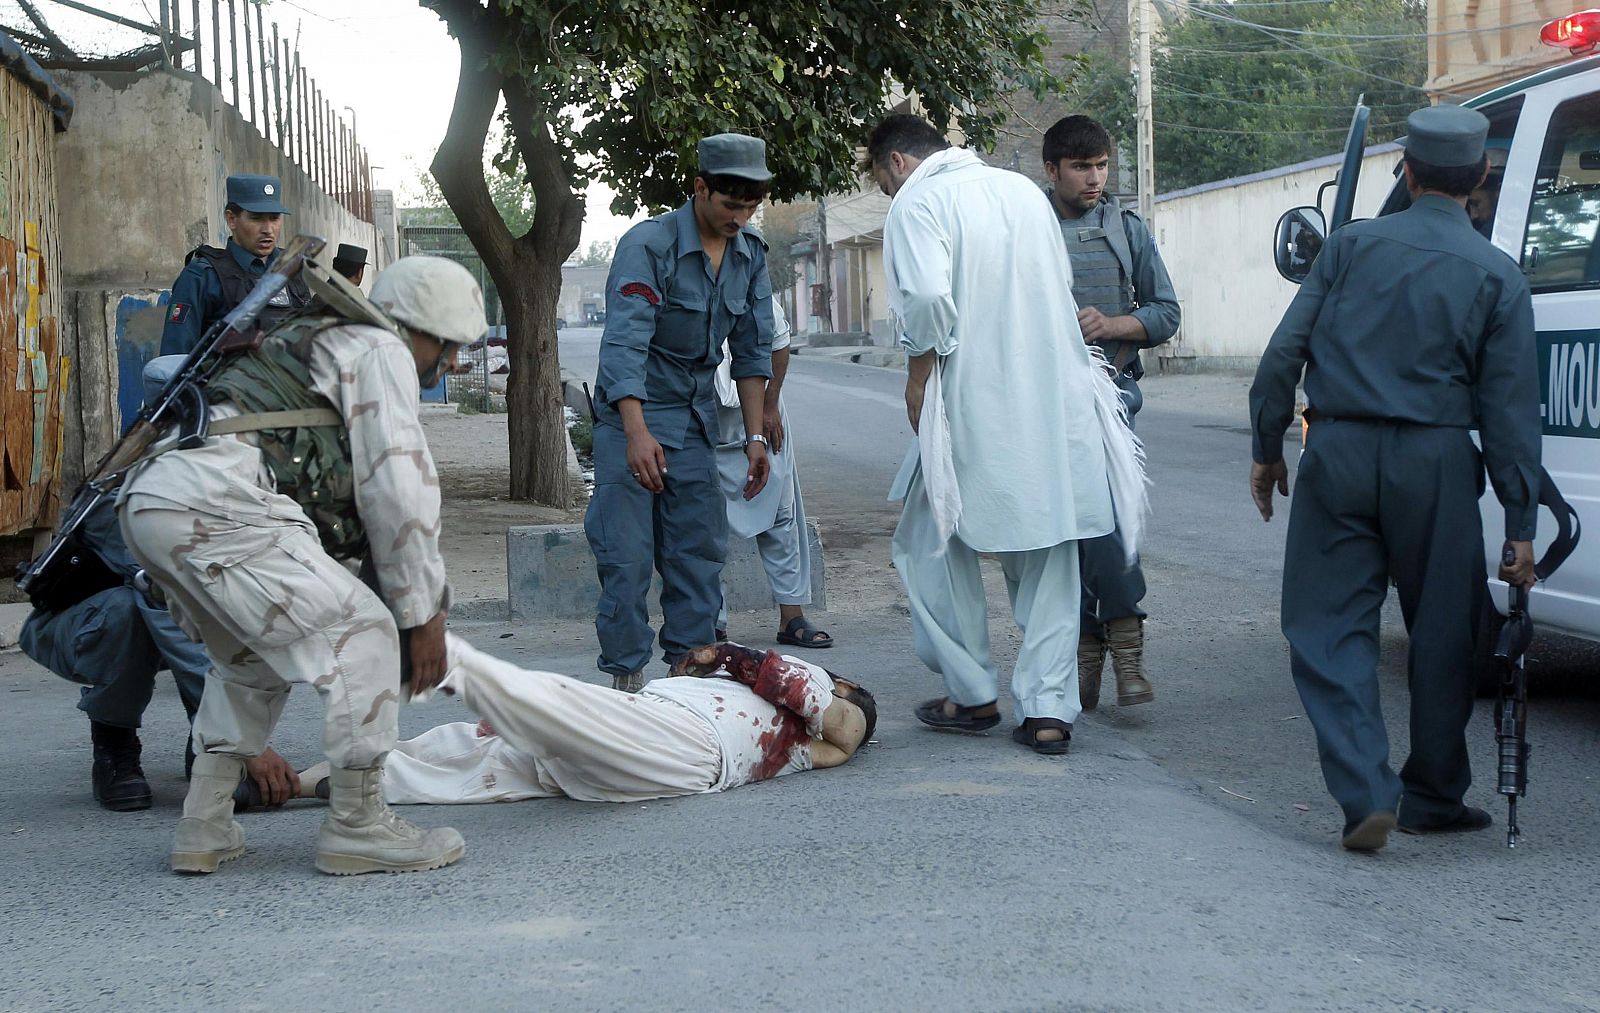 Afghan policemen help a victim from the site of attack in Jalalabad province